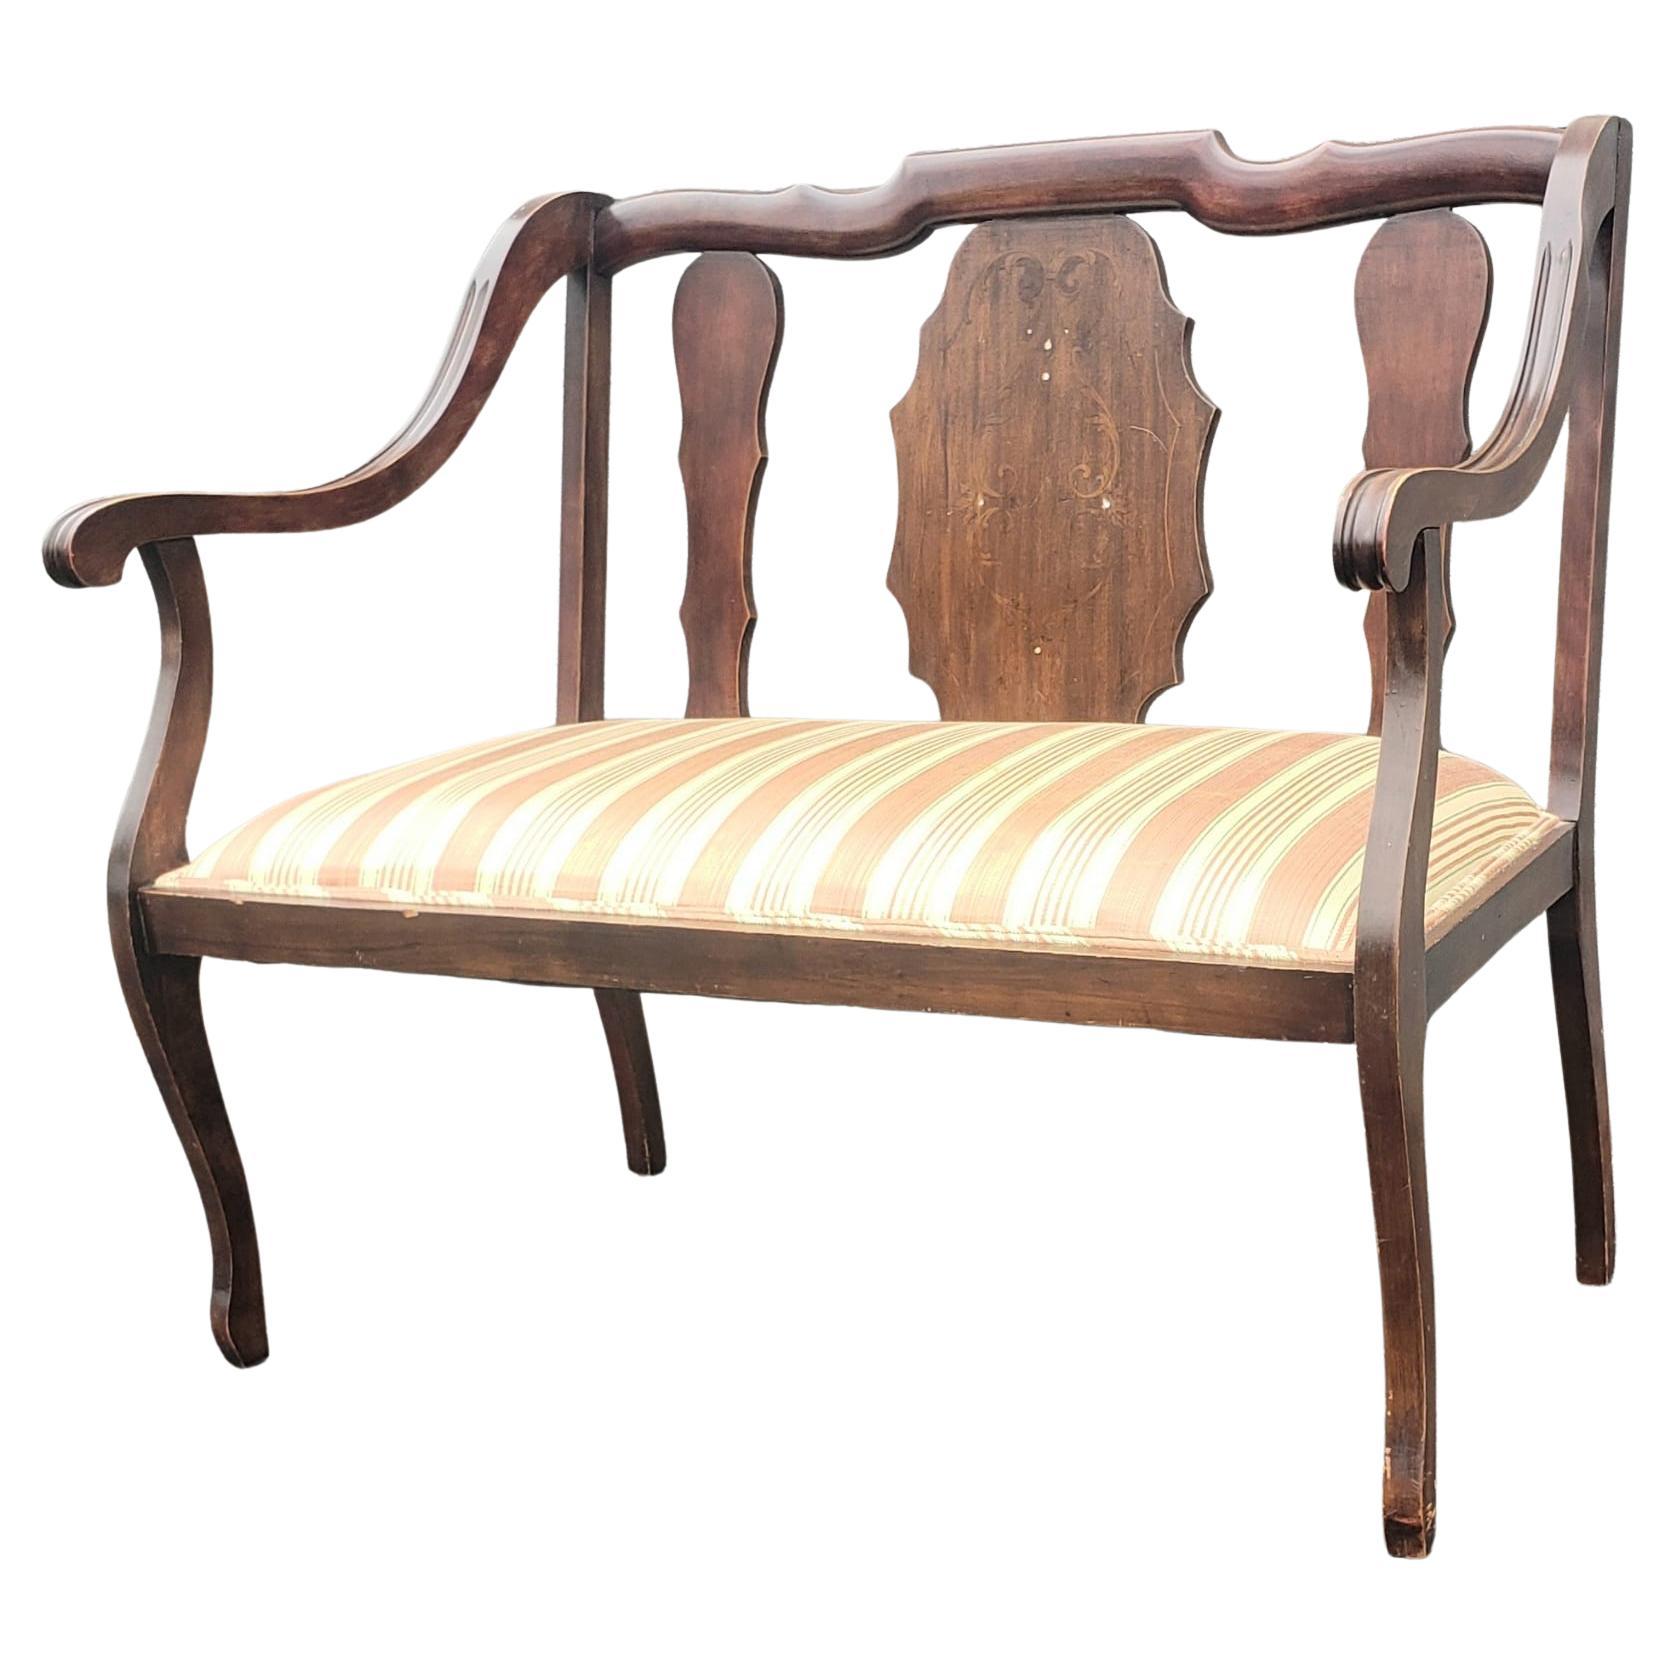 American 20th Century George III Style Walnut with Inlay and Upholstered Seat Settee For Sale